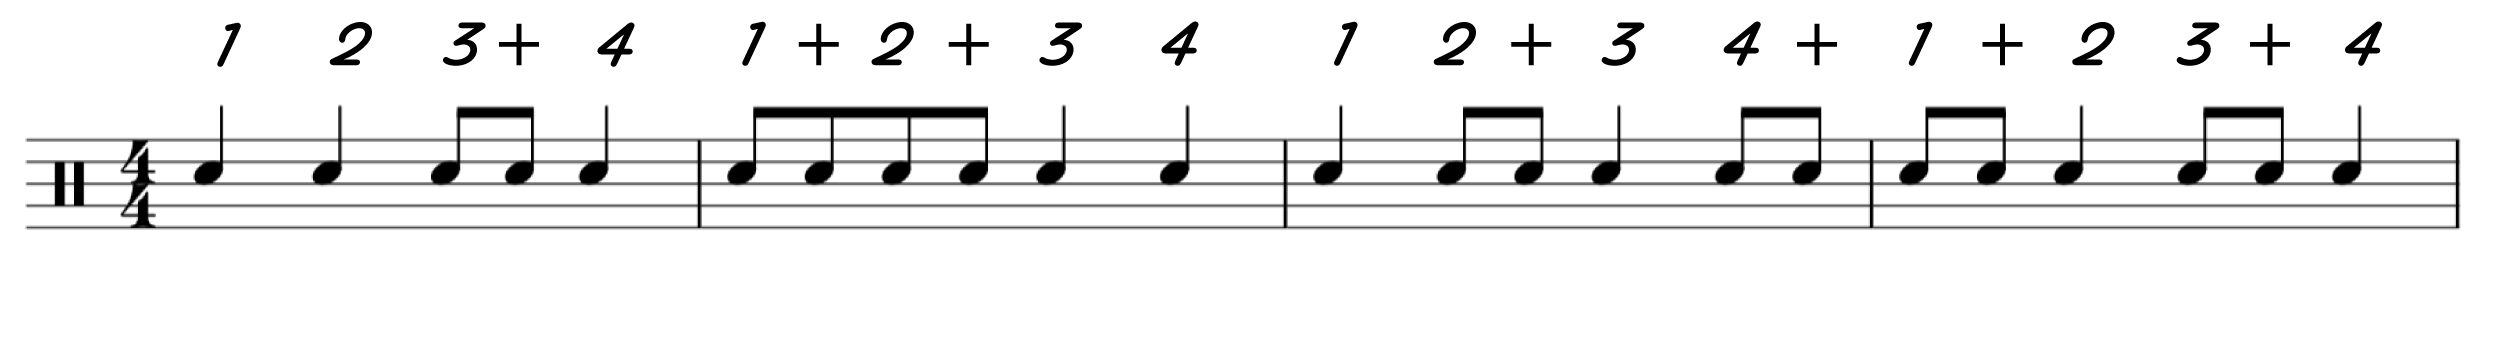 Eighth Note Reading 1.png